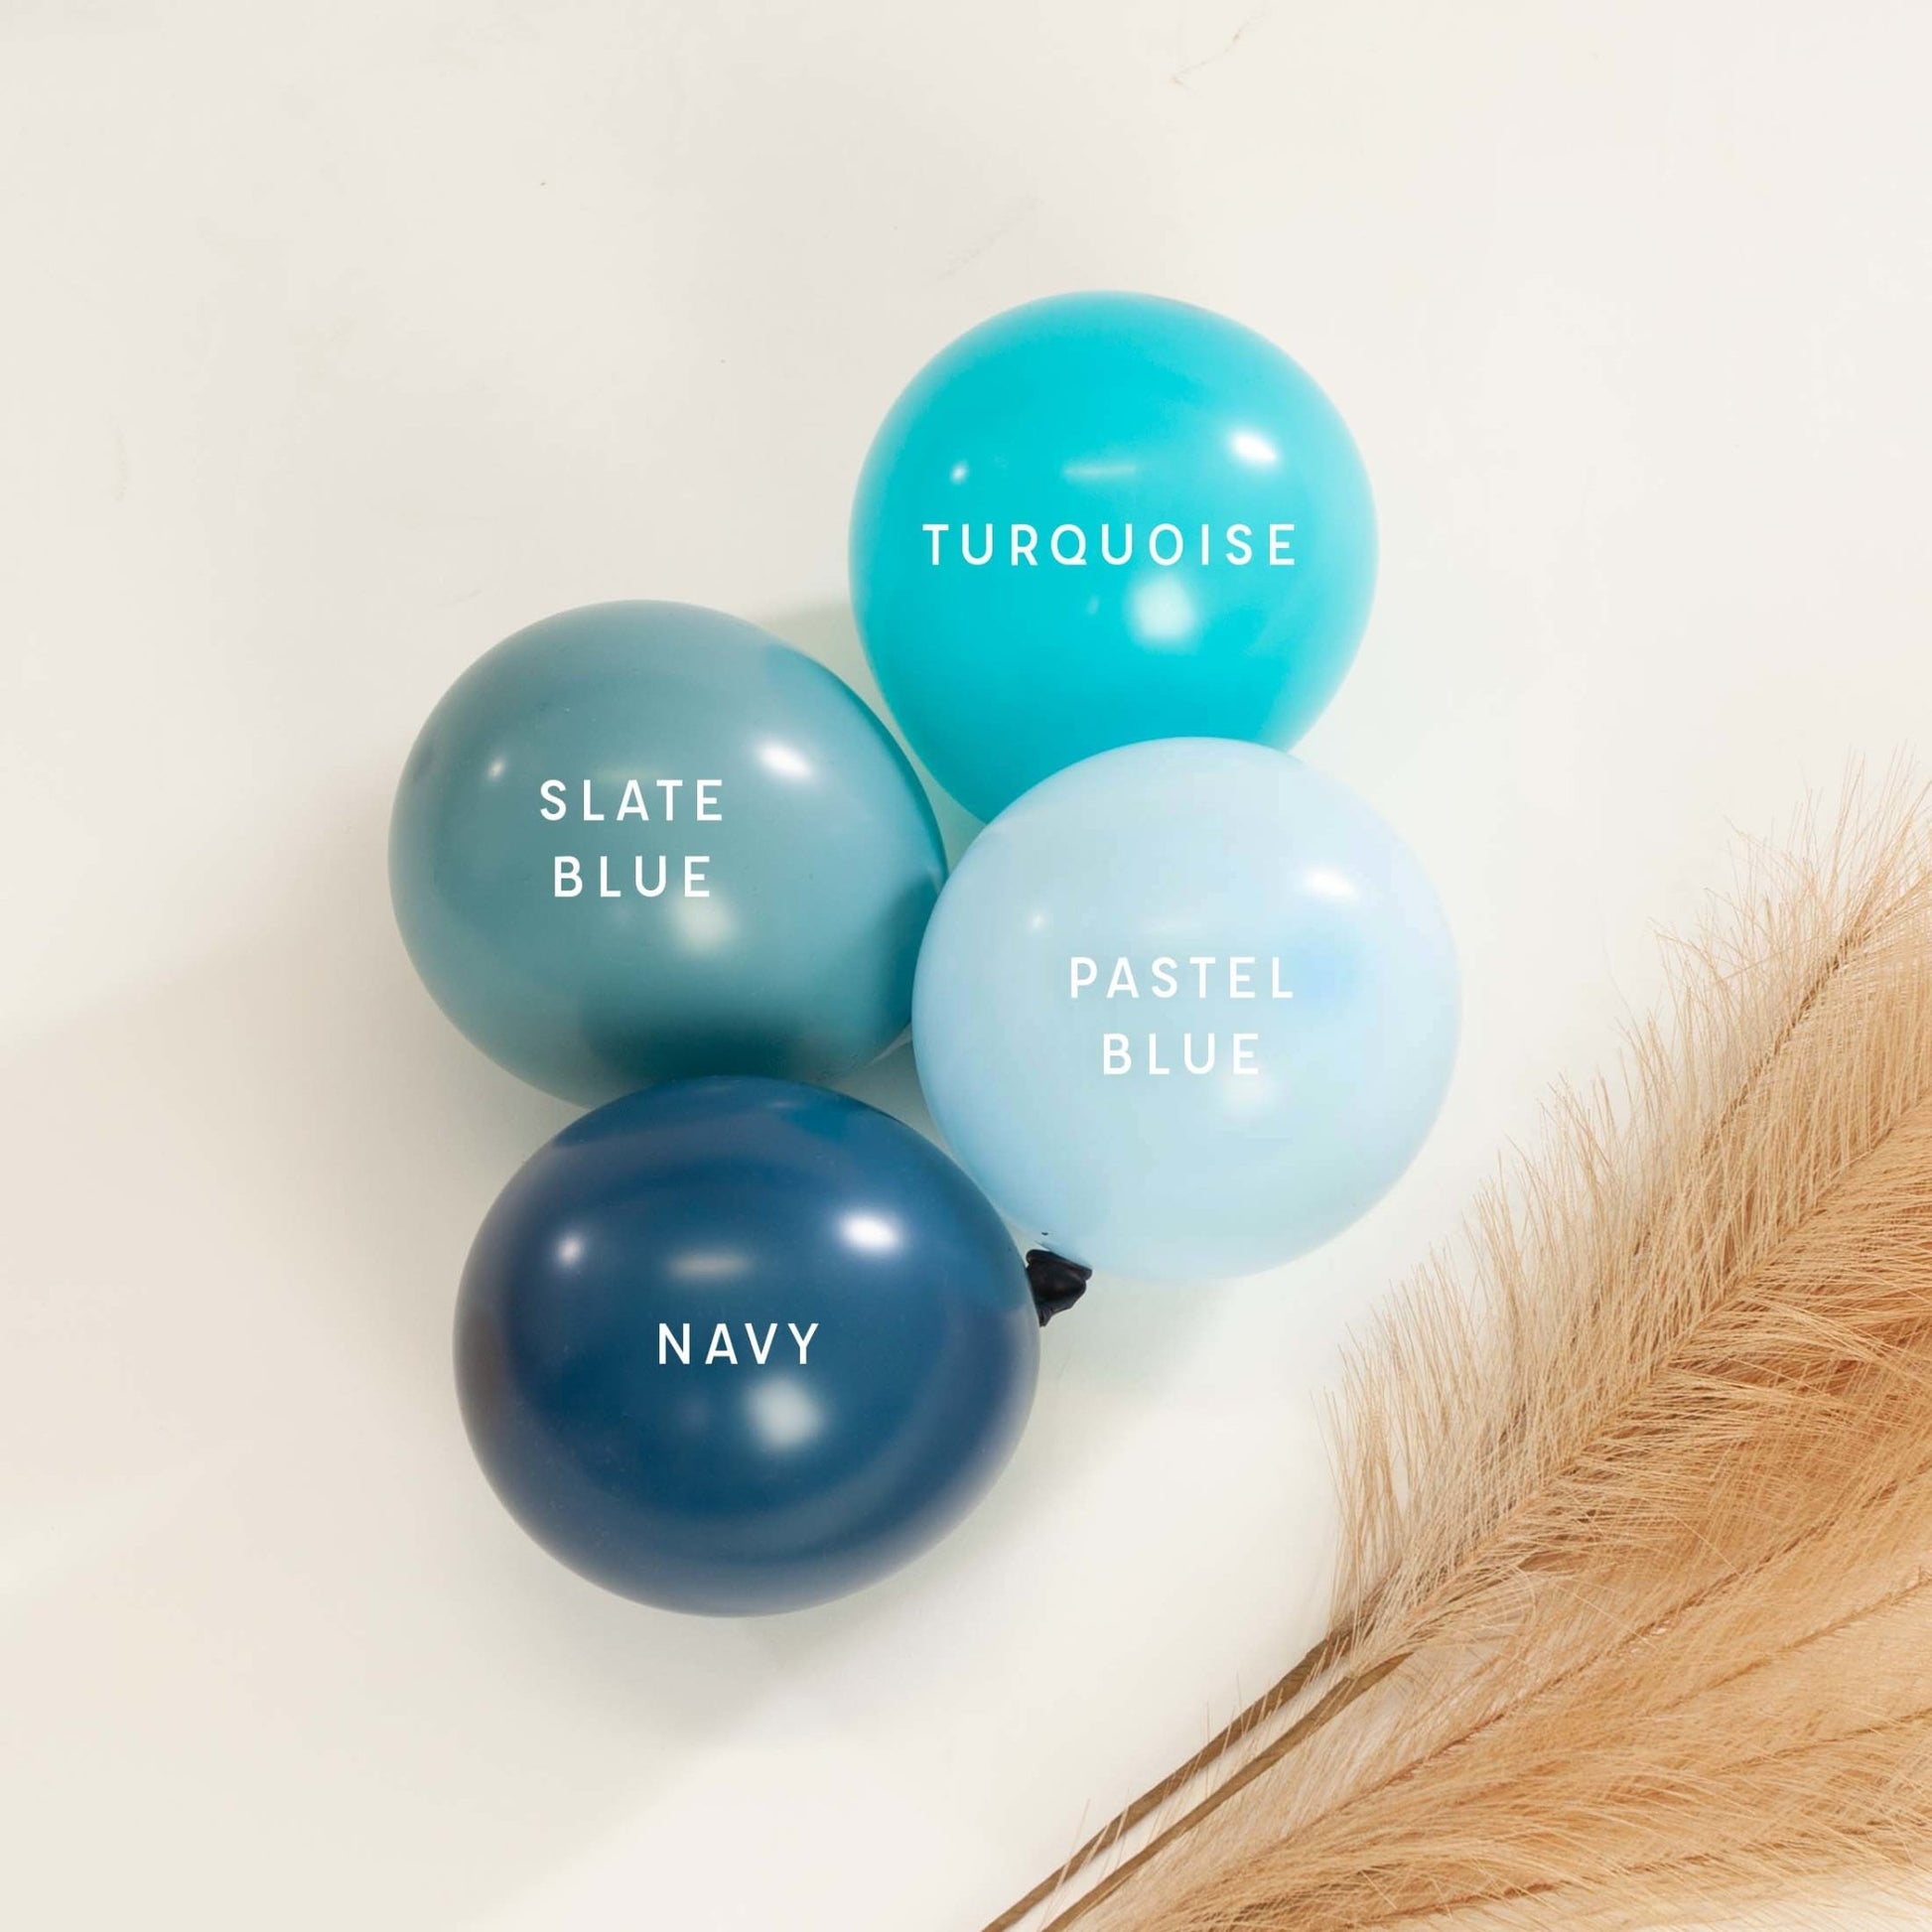 Premium Navy Latex Balloon Packs (5", 11”, 16”, 24”, and 36”) - Ellie's Party Supply